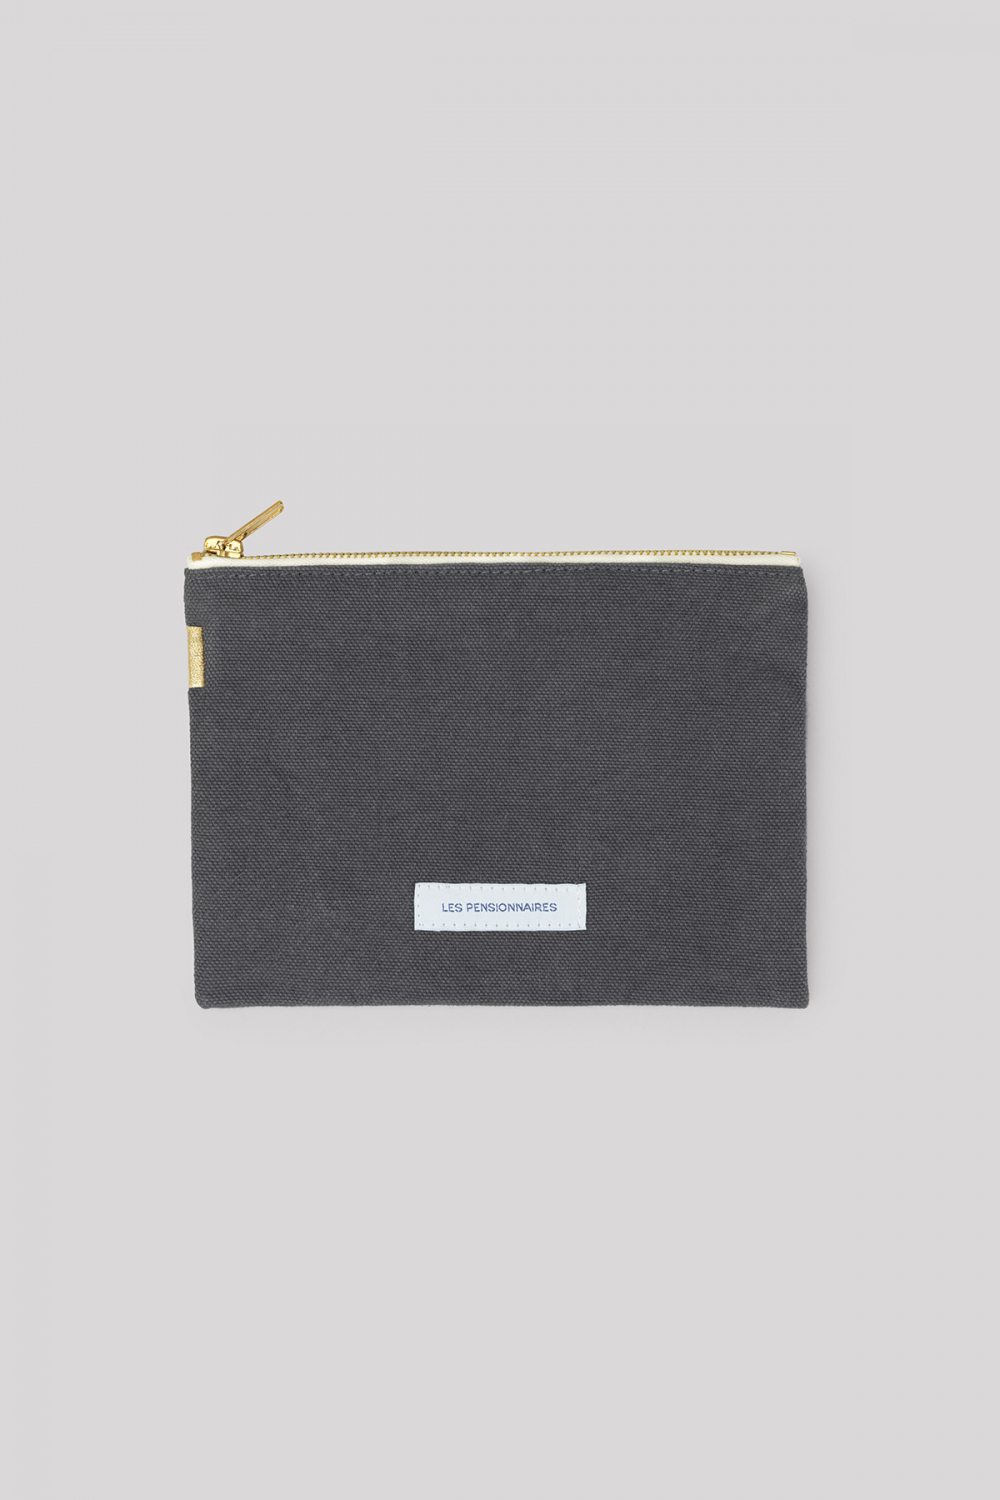 les-pensionnaires-slate-grey-small-organic-cotton-pouch